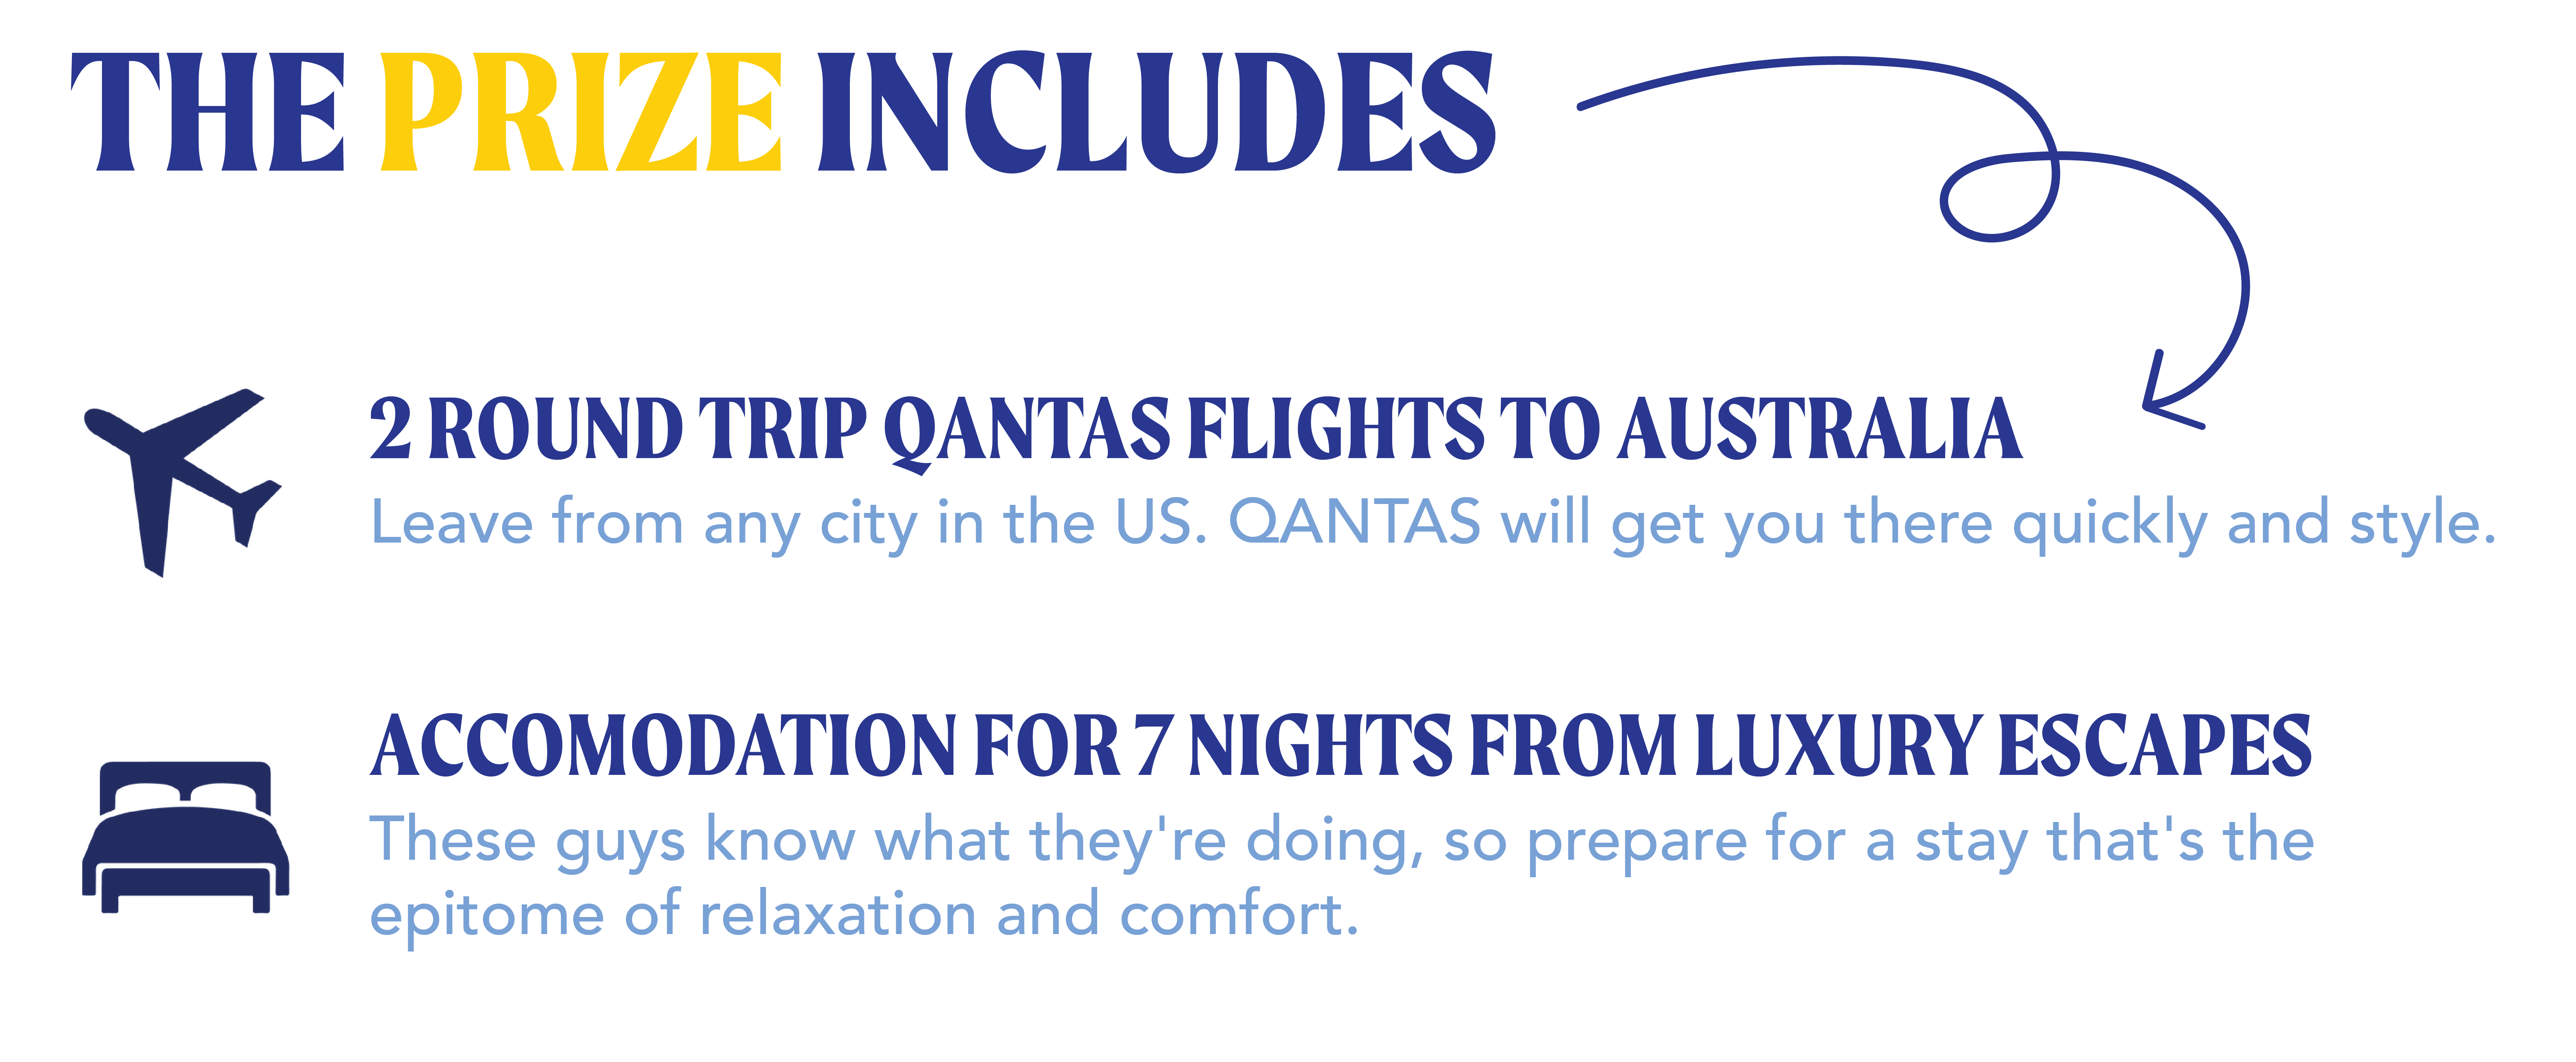 The prize inludes: 2 ROUND TRIP QANTAS FLIGHTS TO AUSTRALIA Leave from any city in the US. QANTAS will get you there quickly and style.  ACCOMODATION FOR 7 NIGHTS FROM LUXURY ESCAPESThese guys know what they're doing, so prepare for a stay that's theepitome of relaxation and comfort.